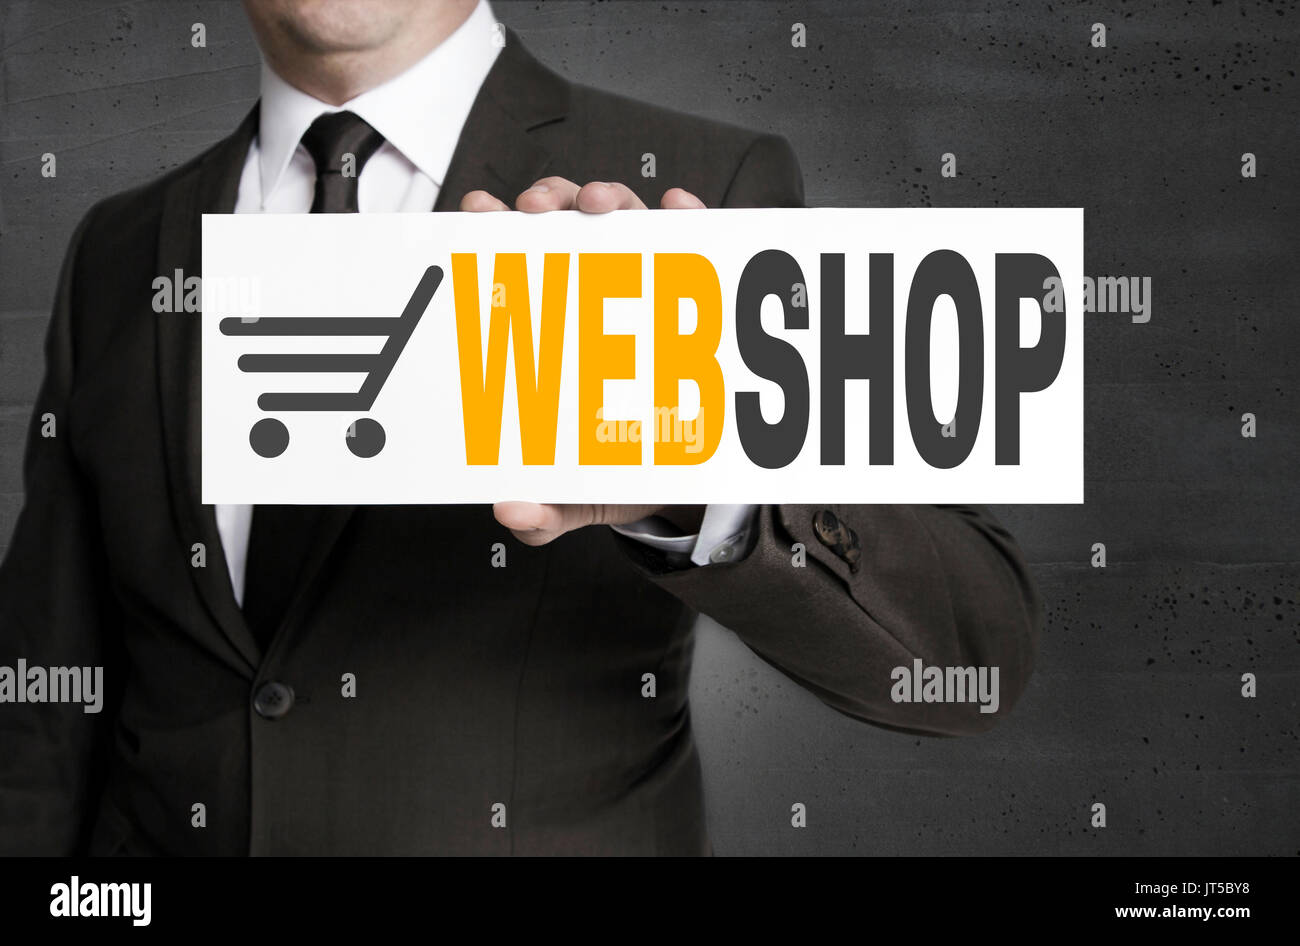 Webshop sign is held by businessman. Stock Photo